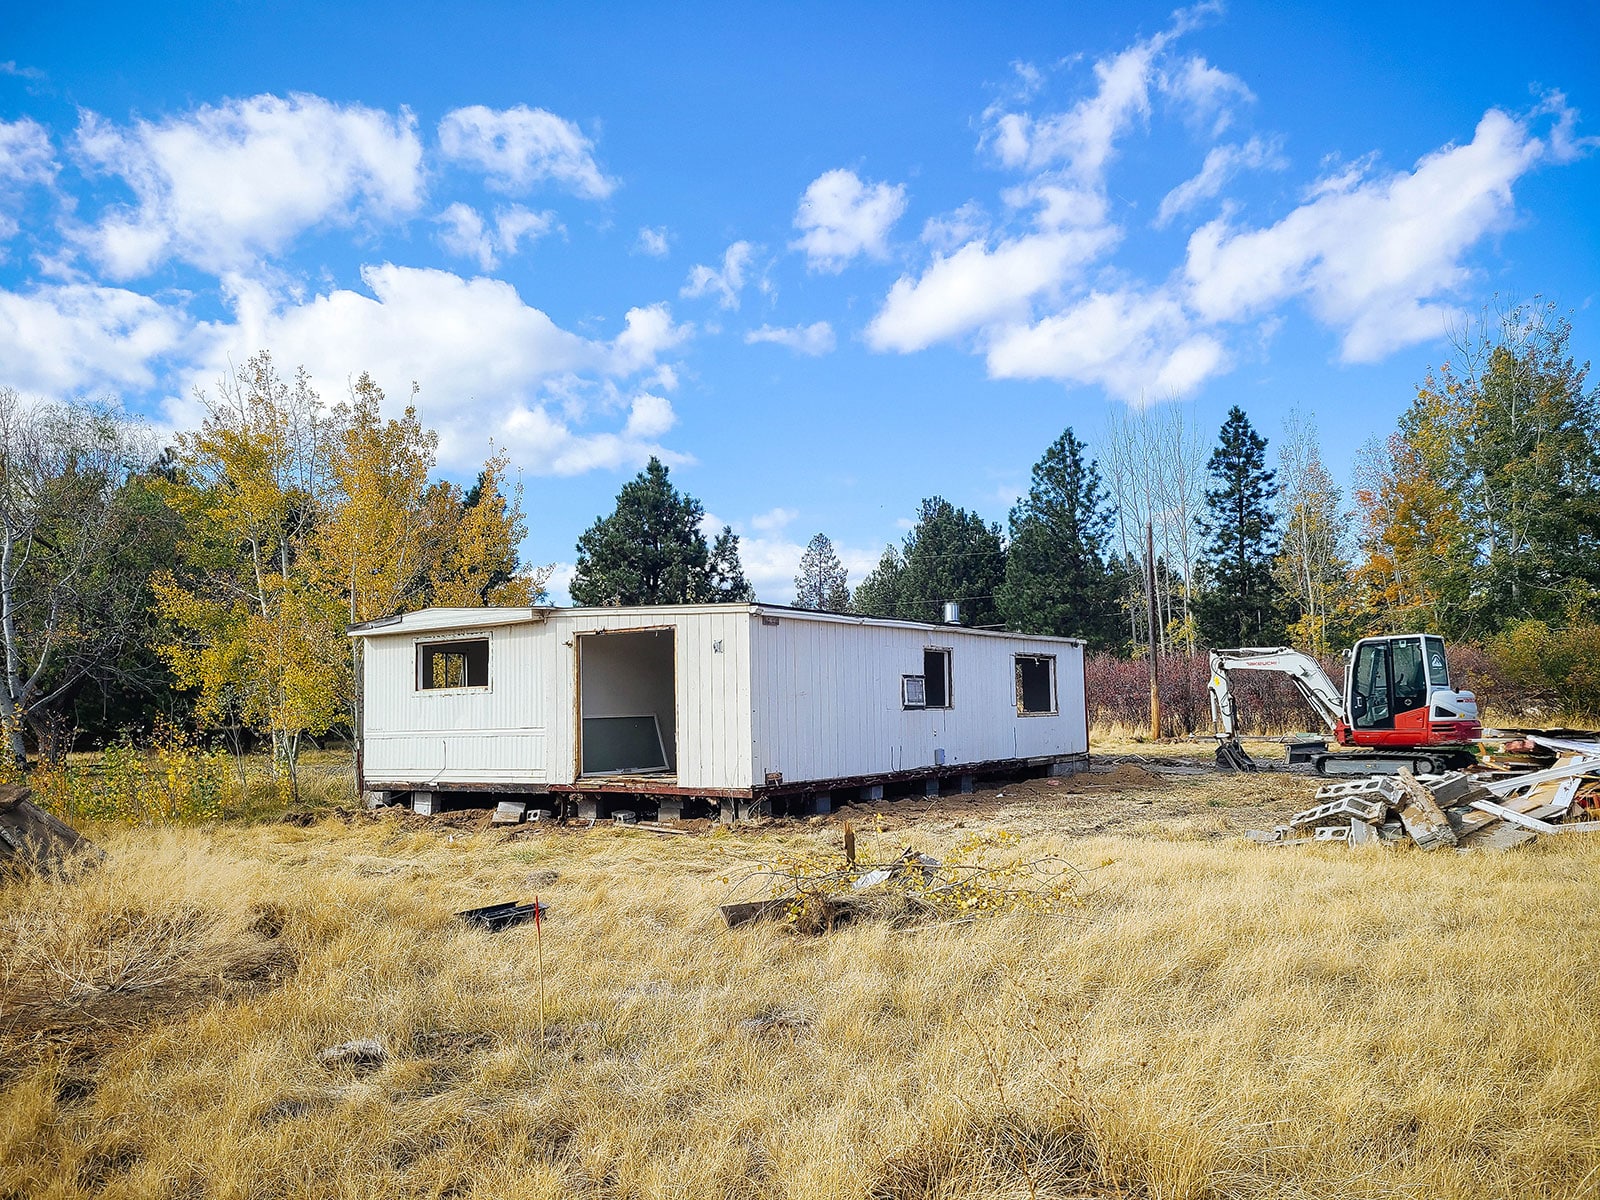 Older white manufactured home with missing windows and doors in a field of yellow grass